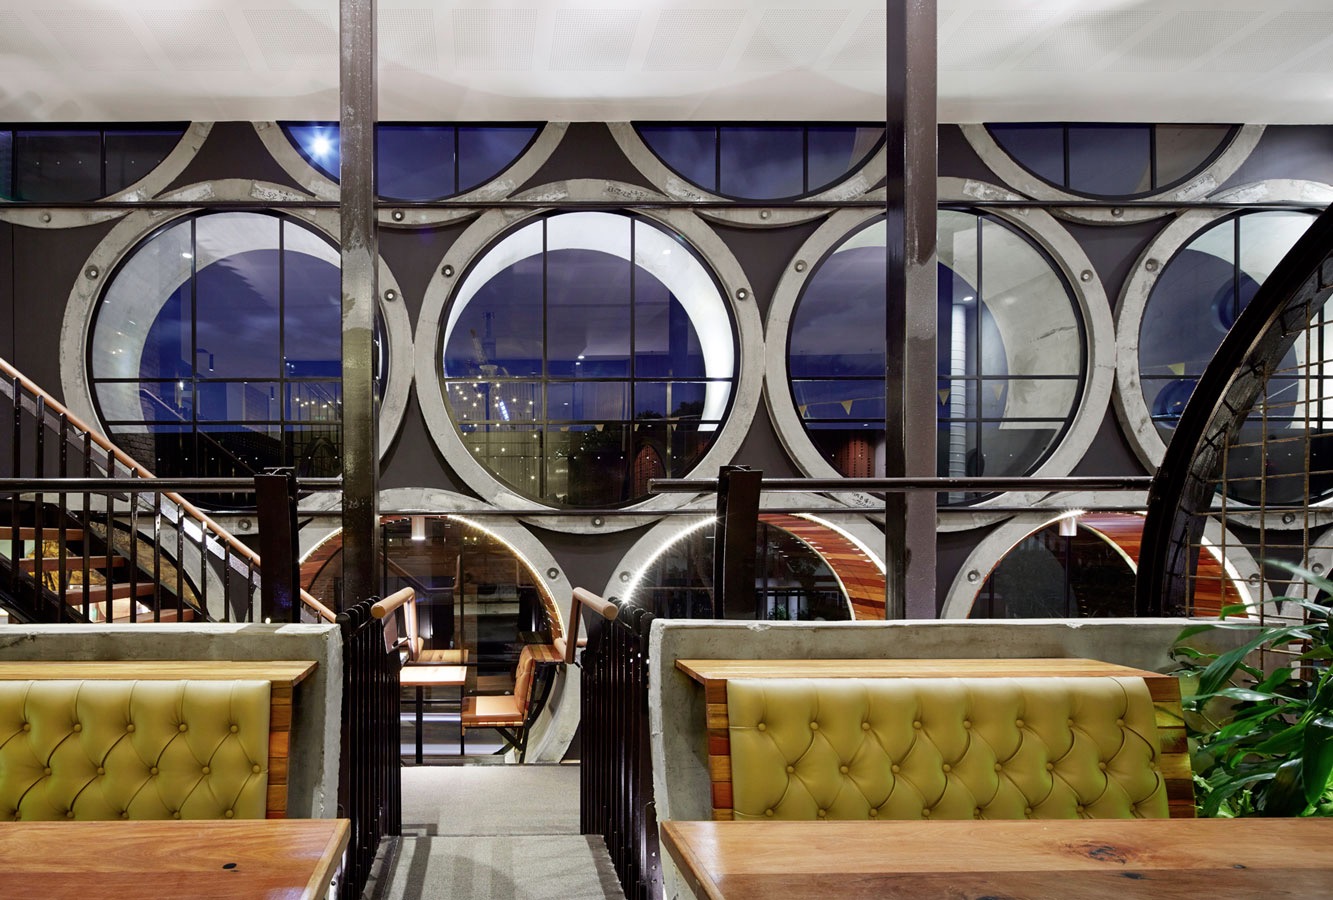 Prahran Hotel interiors by Techné Architects. More #concrete on the blog.